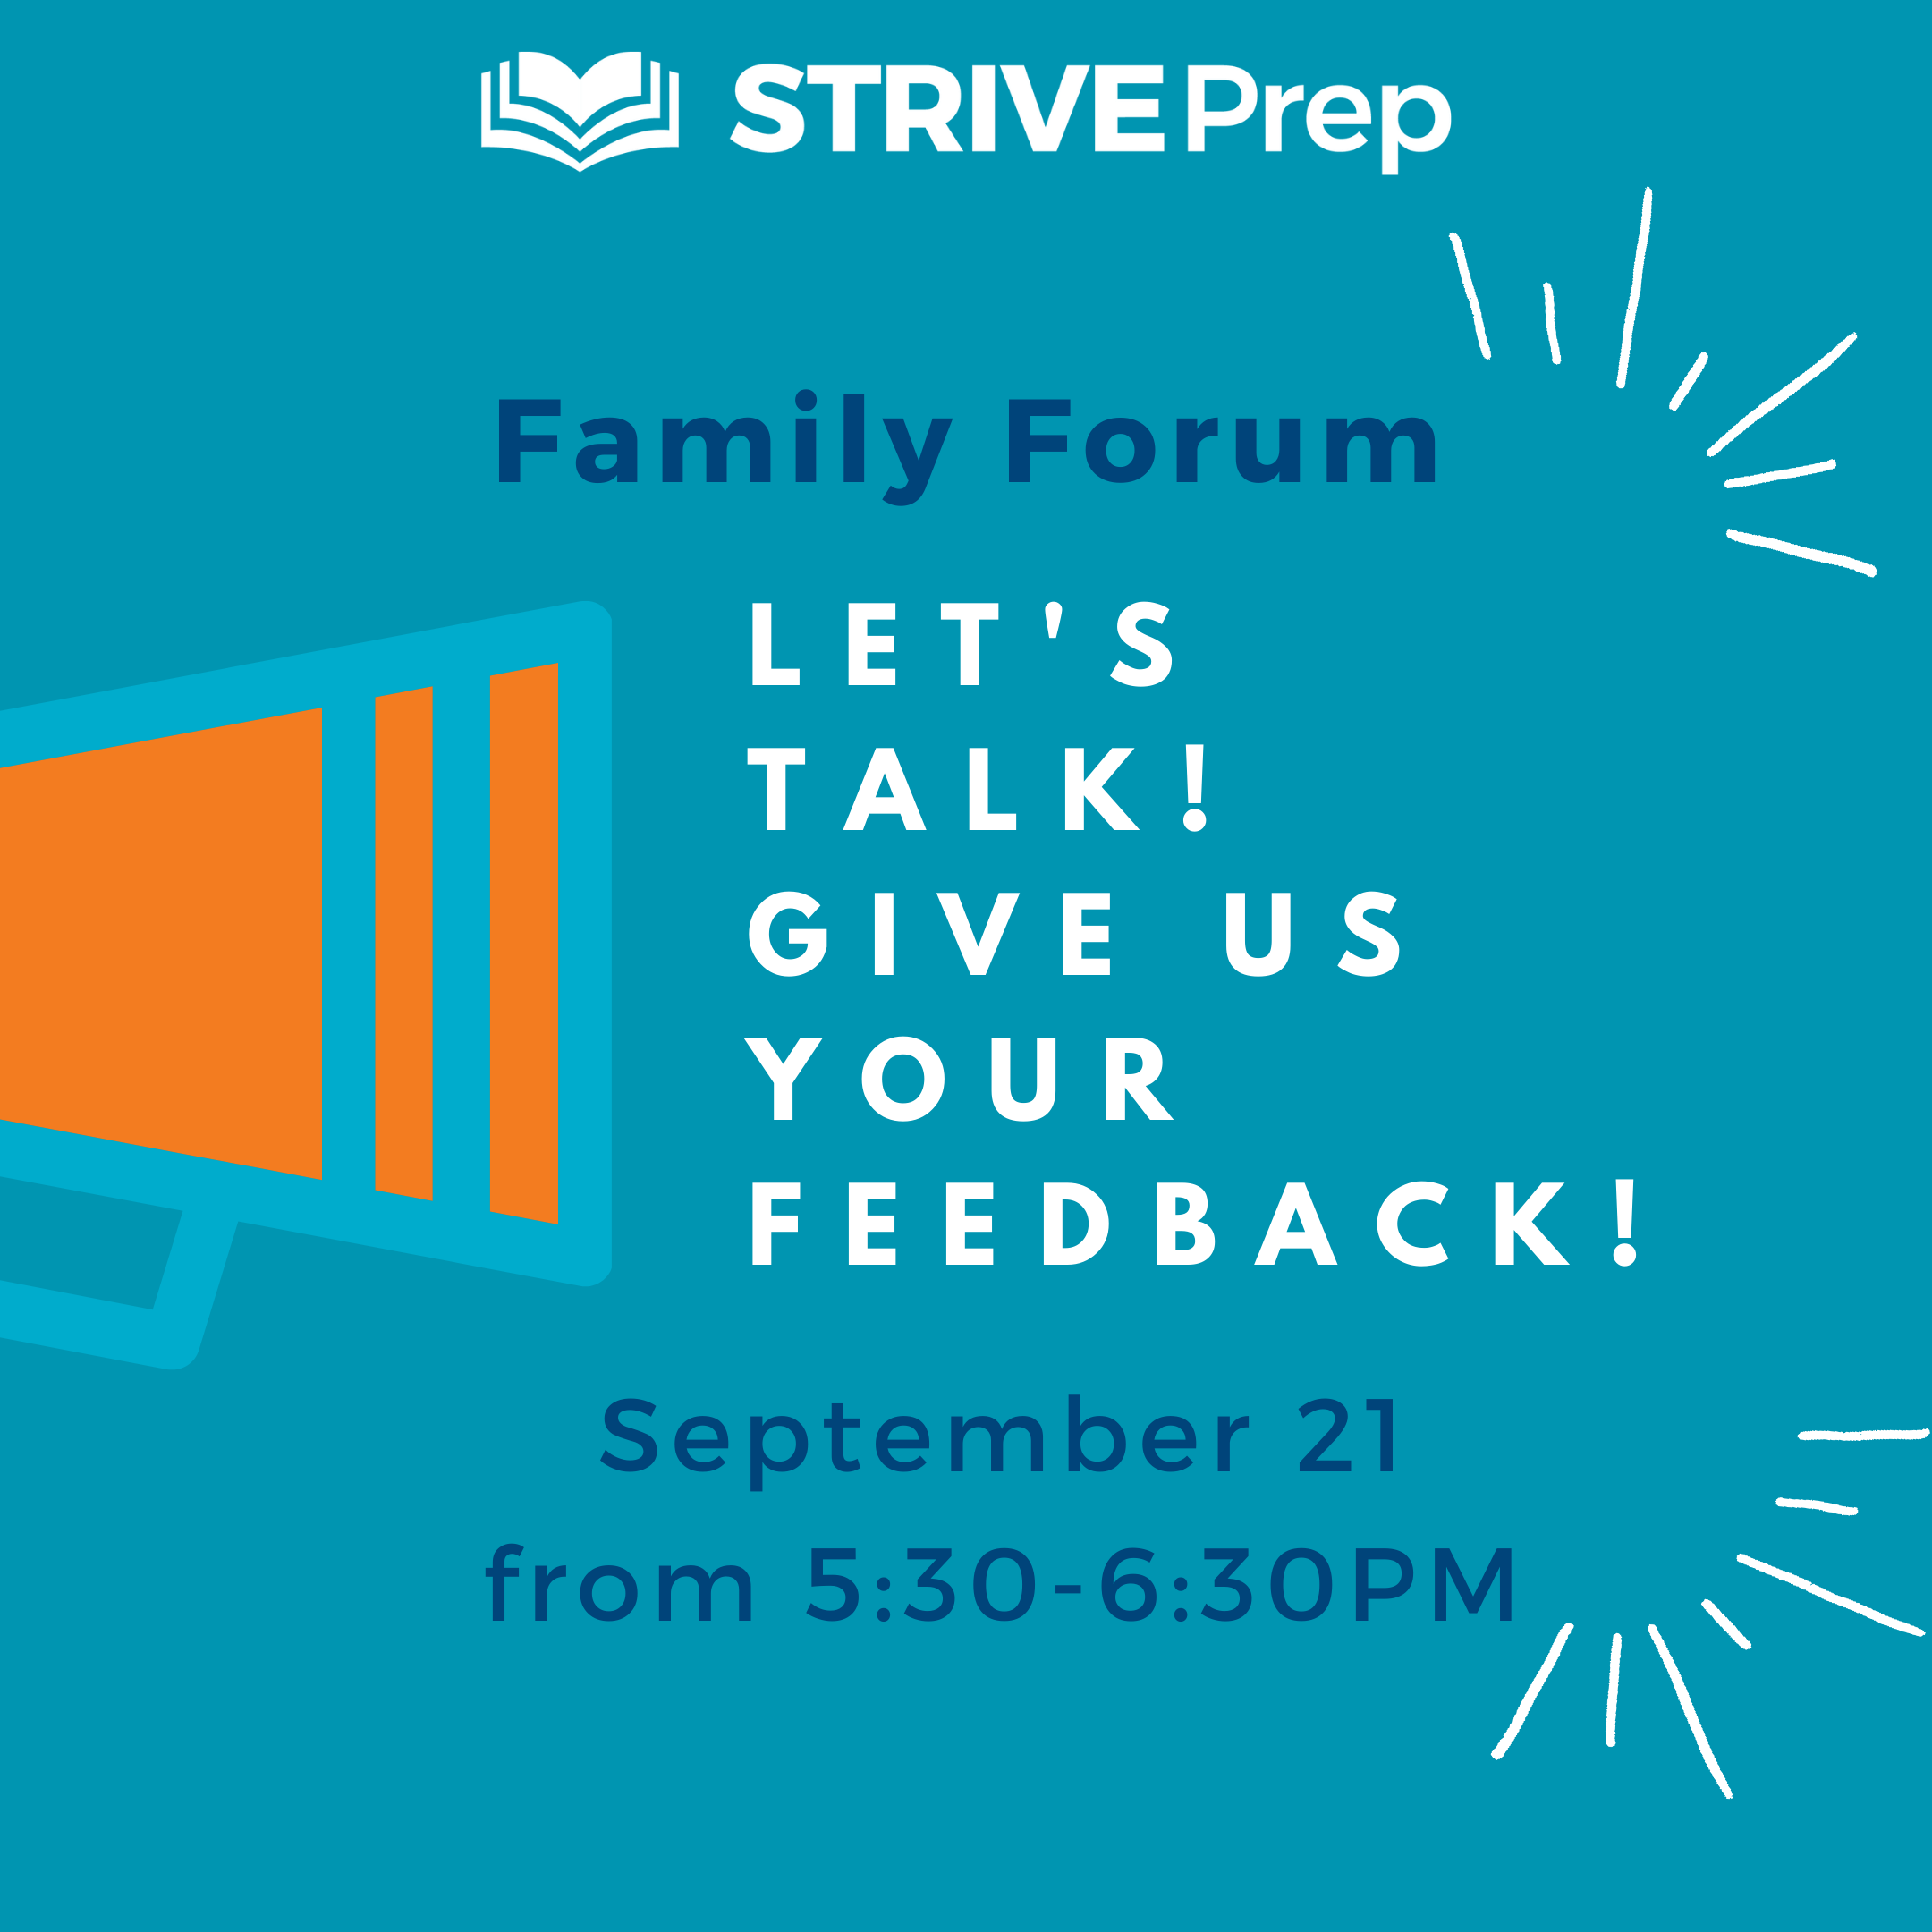 Family Forum: Share your feedback about the first month of school